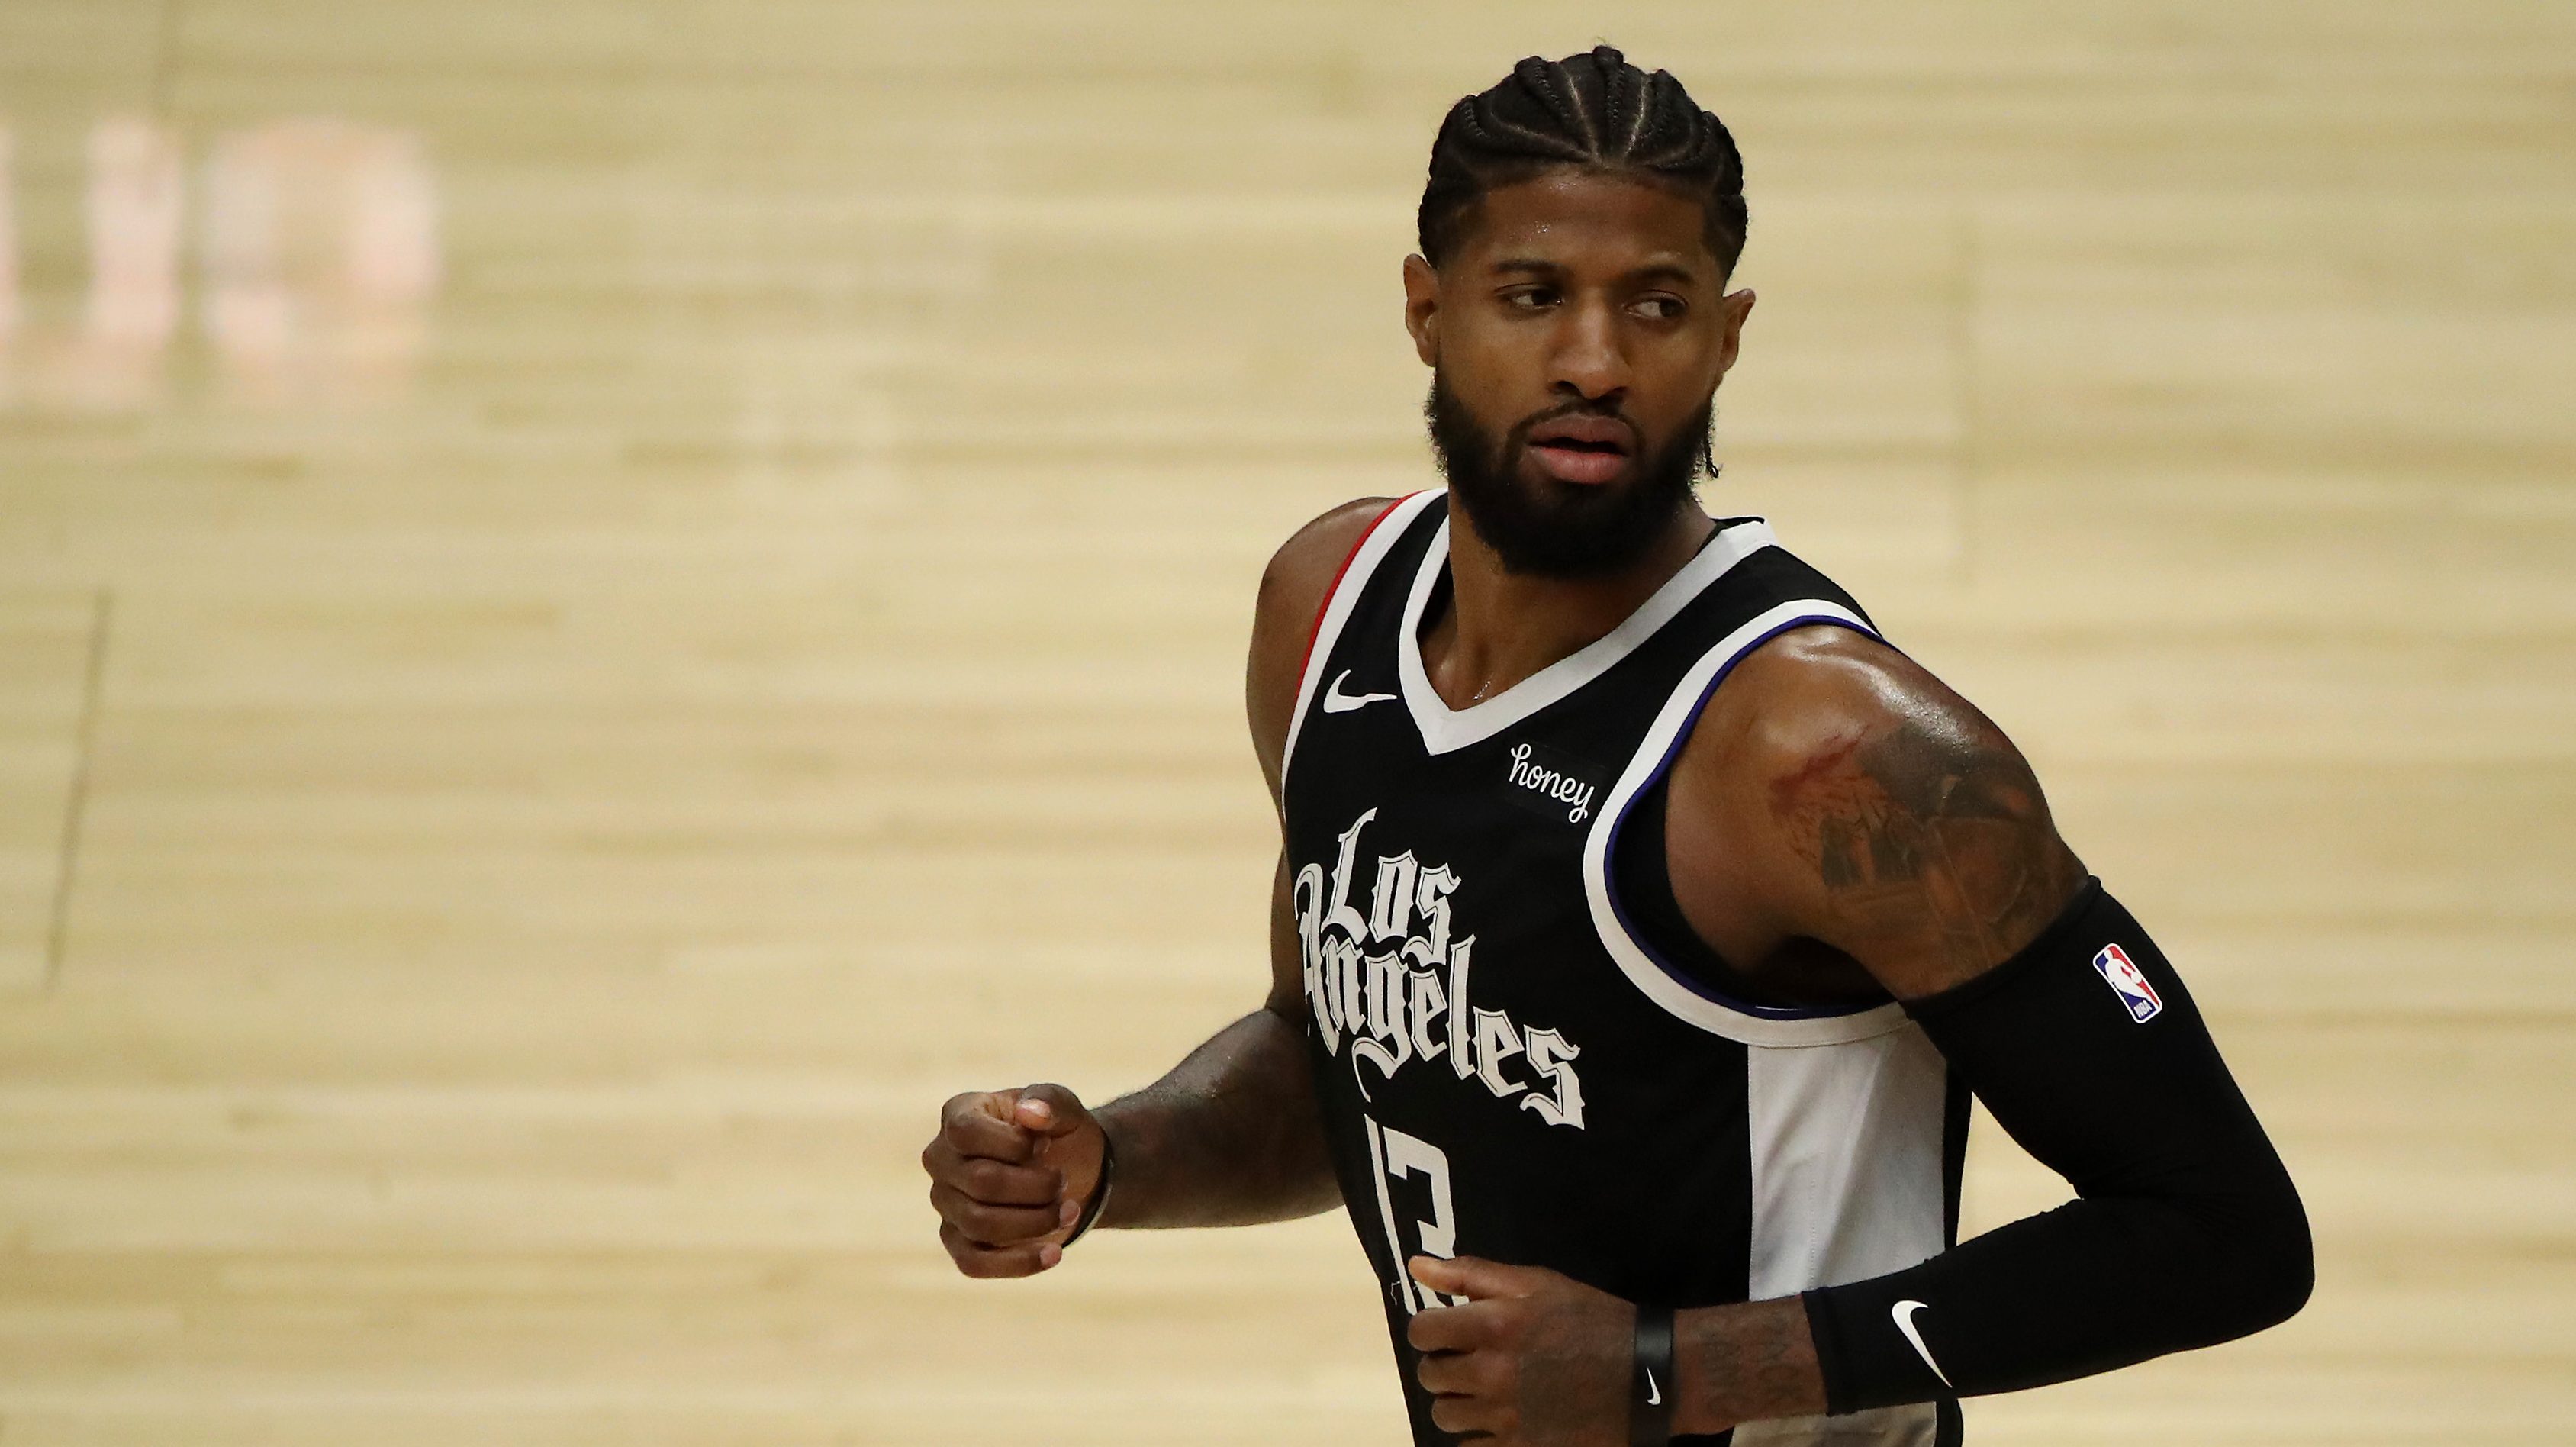 The Clippers are reportedly entertaining trade offers for Paul